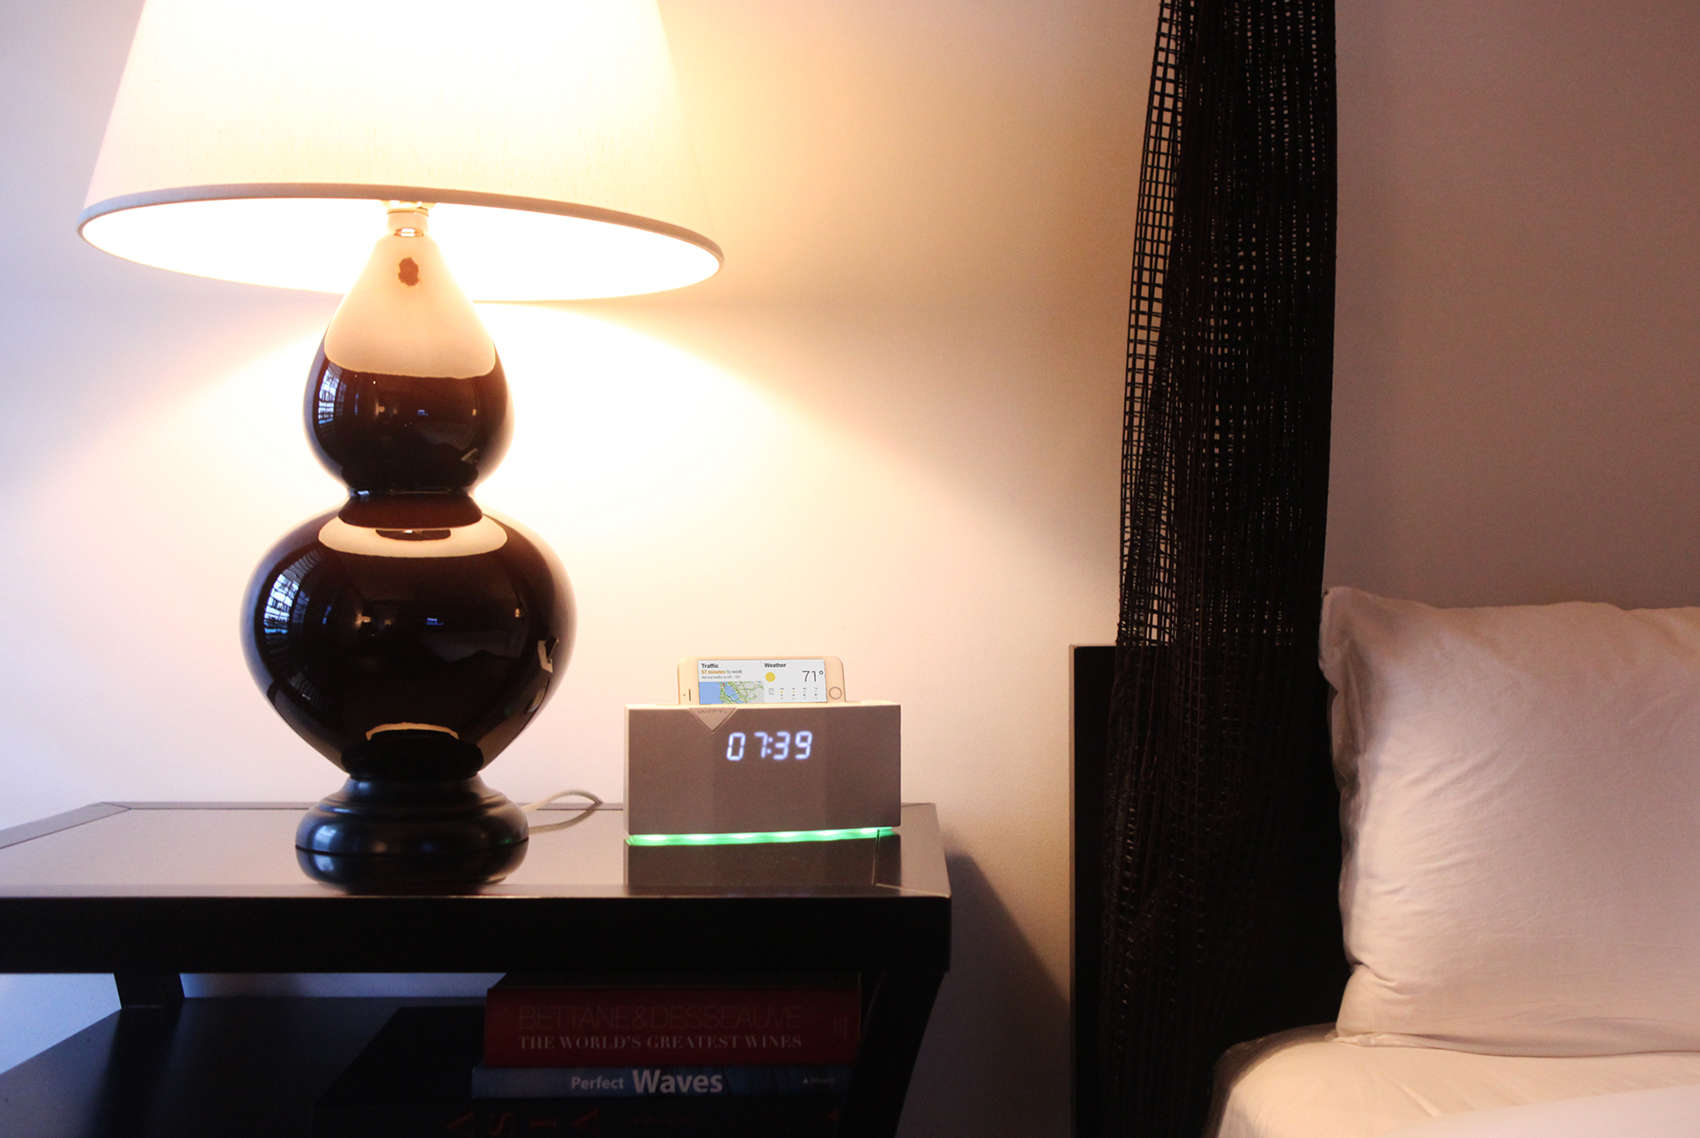 The Beddi smart alarm clock has a host of functions. Waking you from sleep is just a start.